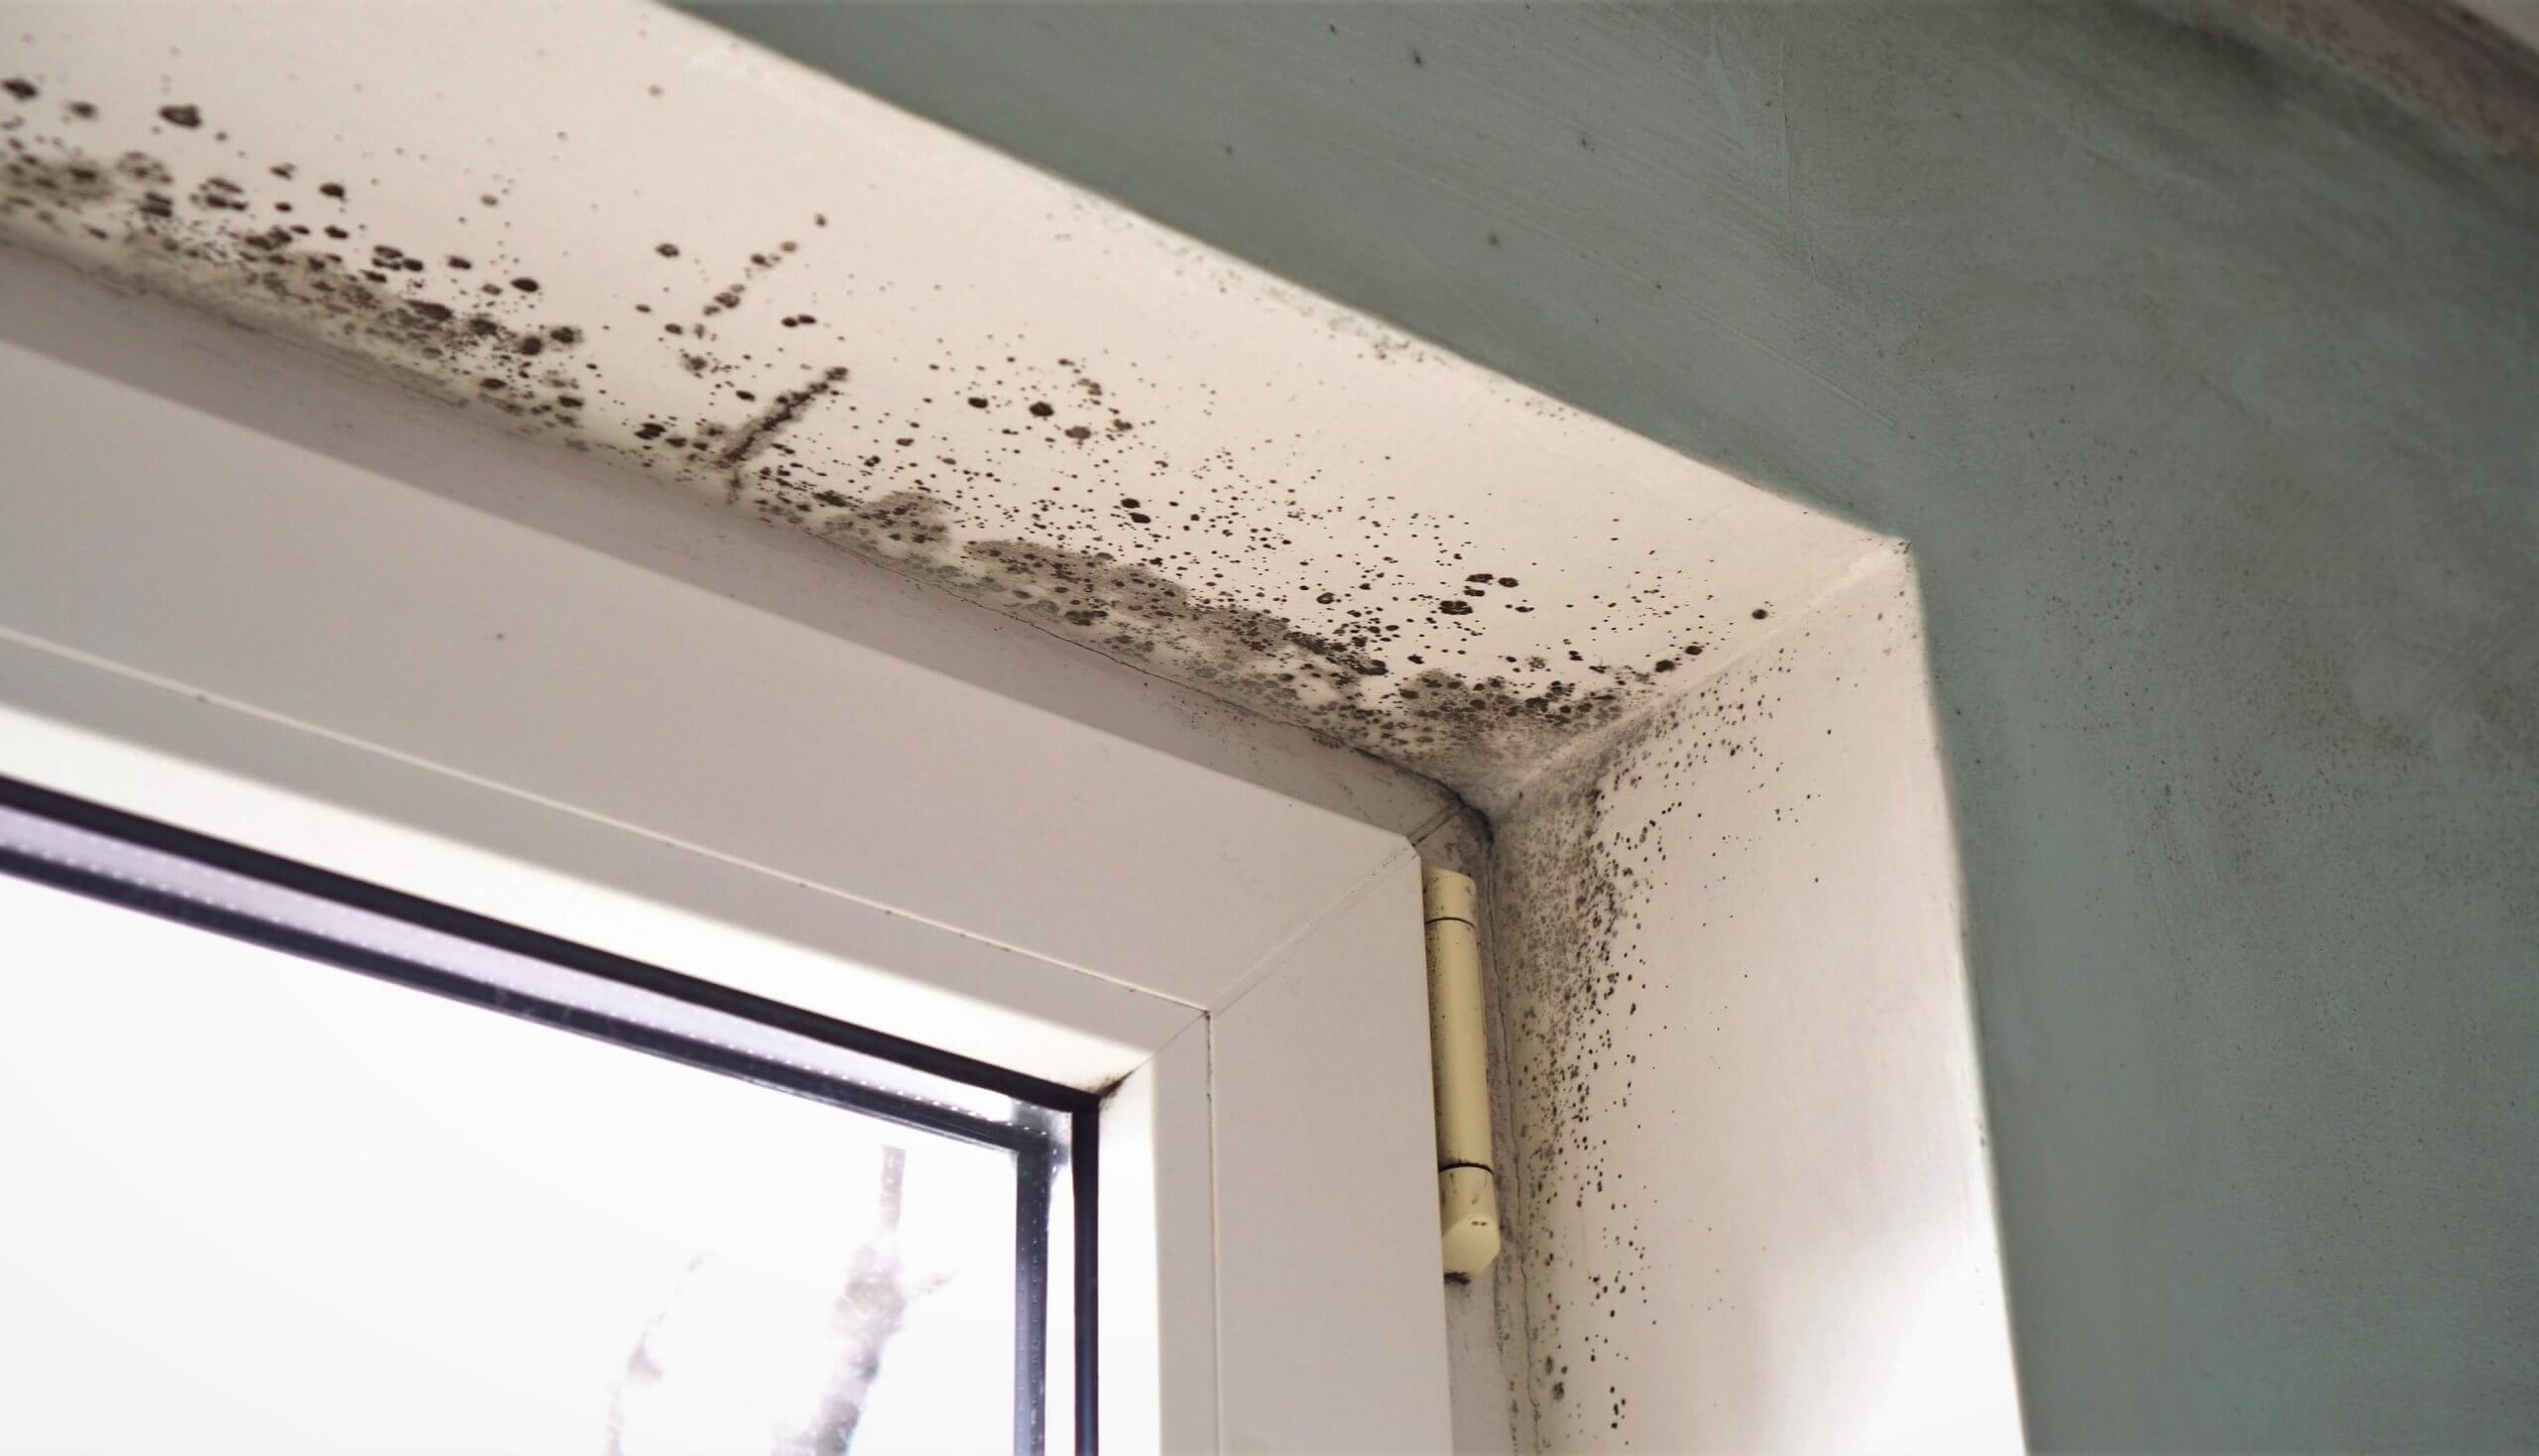 Mould Growth in the Home 2